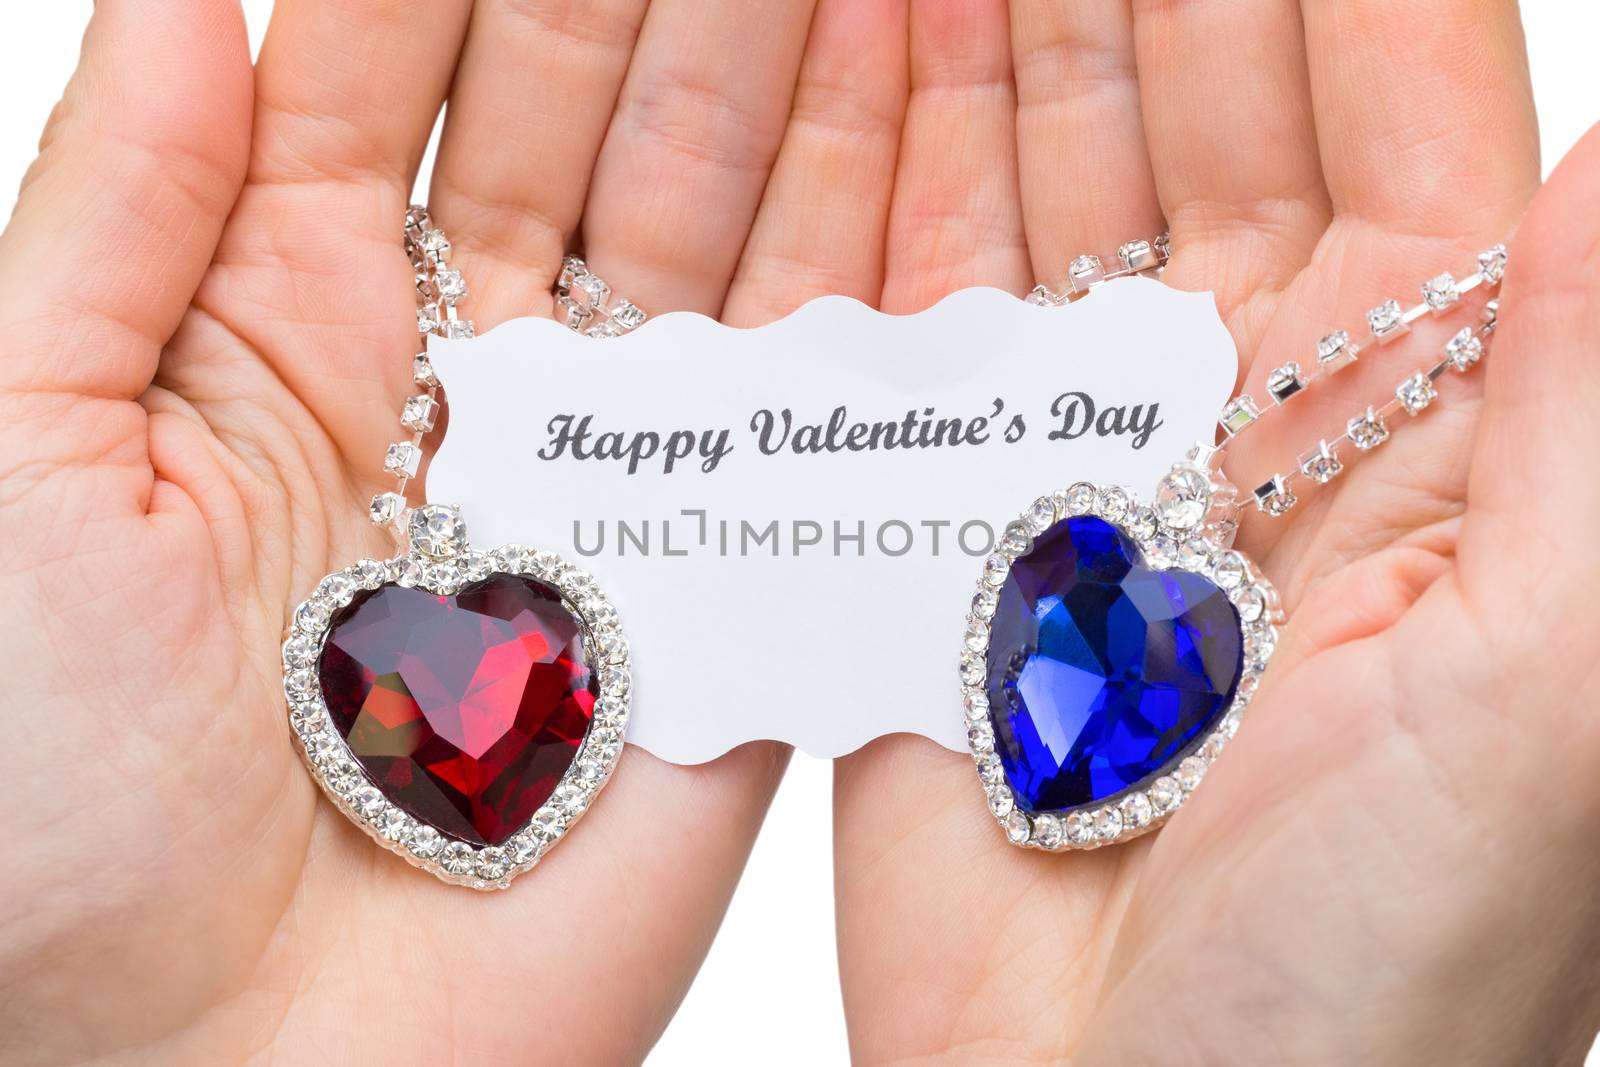 Red and blue jewelry heart with valentine card on hands by BenSchonewille